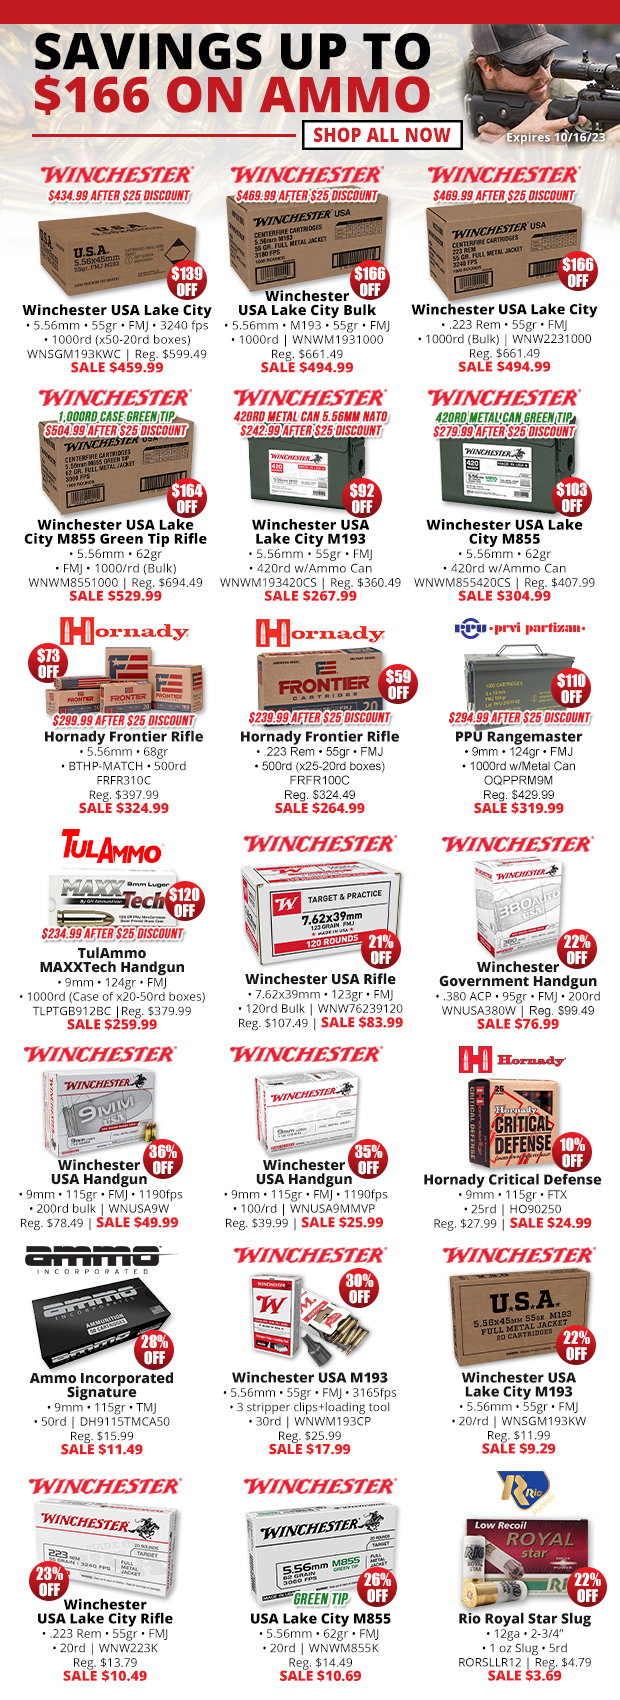 Savings Up to $166 on Ammo  Shop All Now